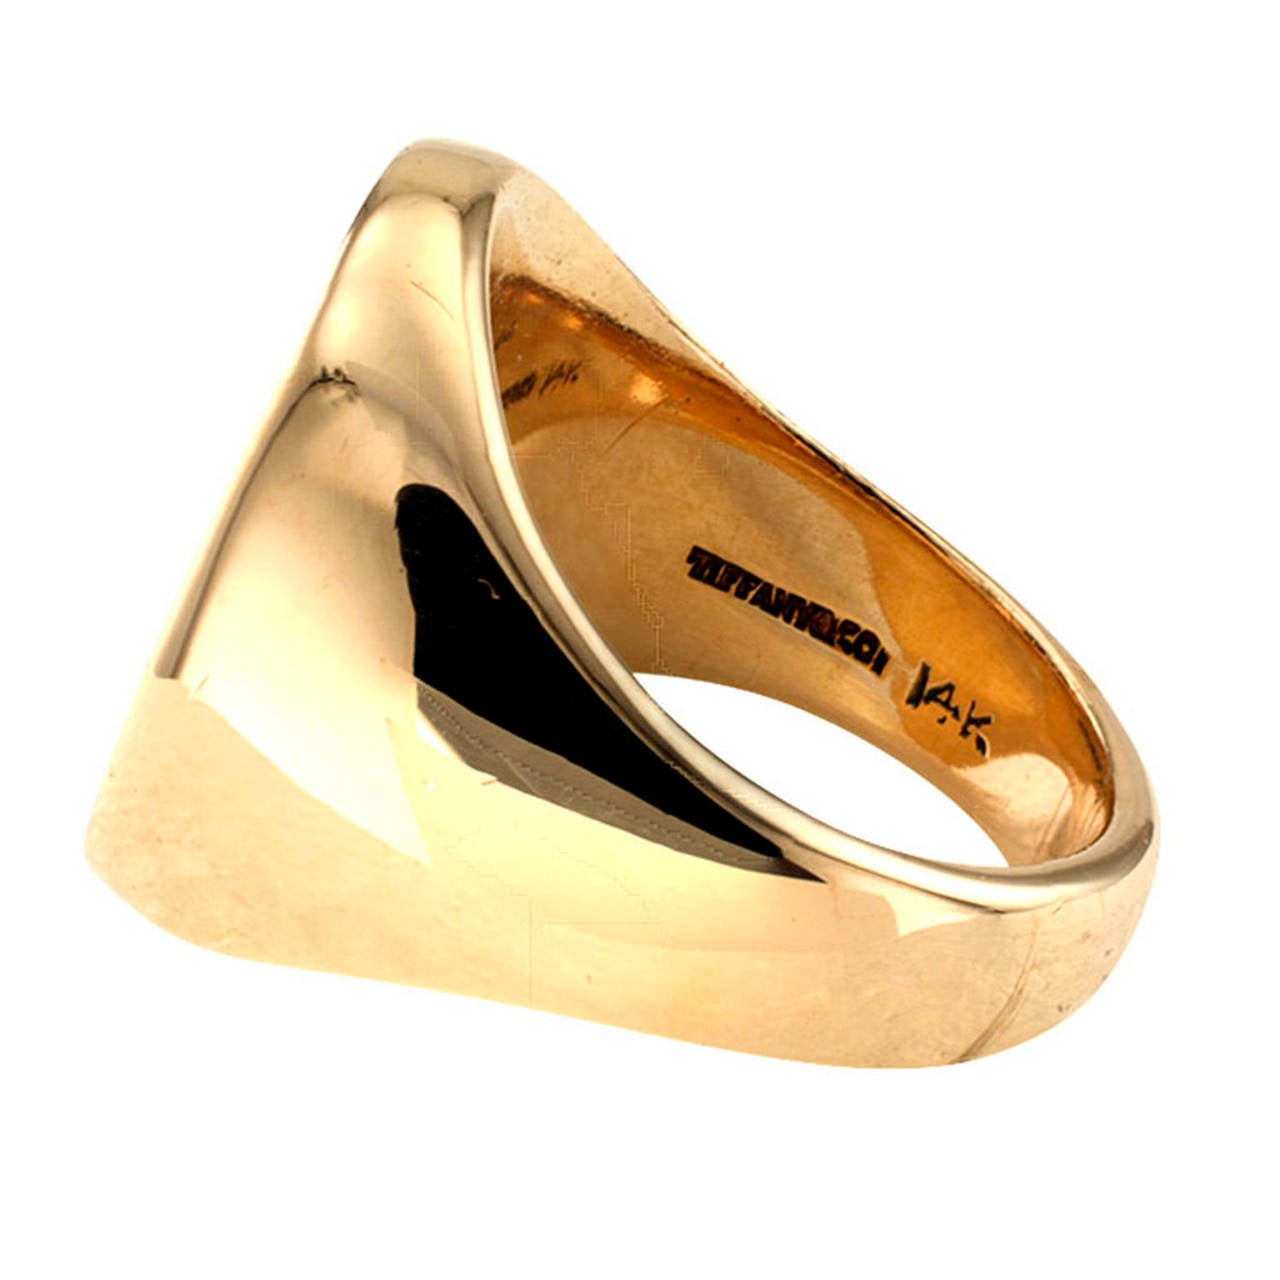 A classic signet ring by one of America's most famous and cherished jewelry manufactures, Tiffany & Co.  This particular one featuring an elegant intaglio crest in 14 karat yellow gold, ring size 6 1/2, 1 1/8 long vertical to the fingernail. This